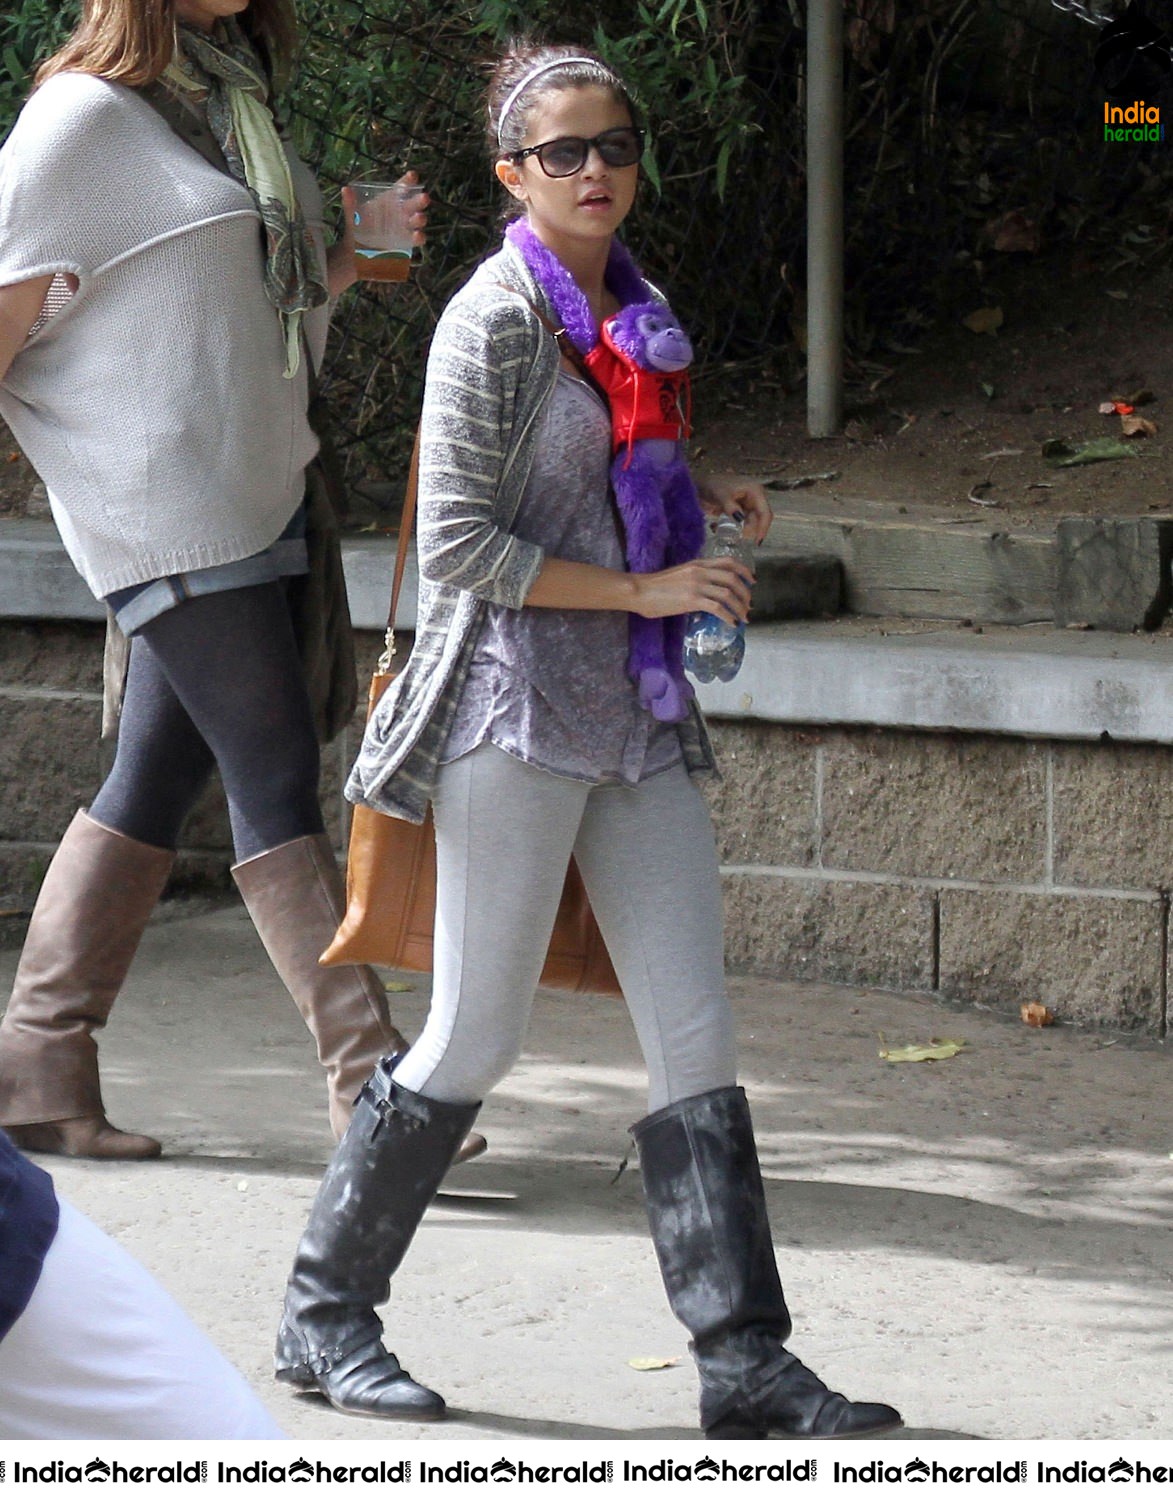 Selena Gomez Visits Los Angeles Zoo with her friends Set 1